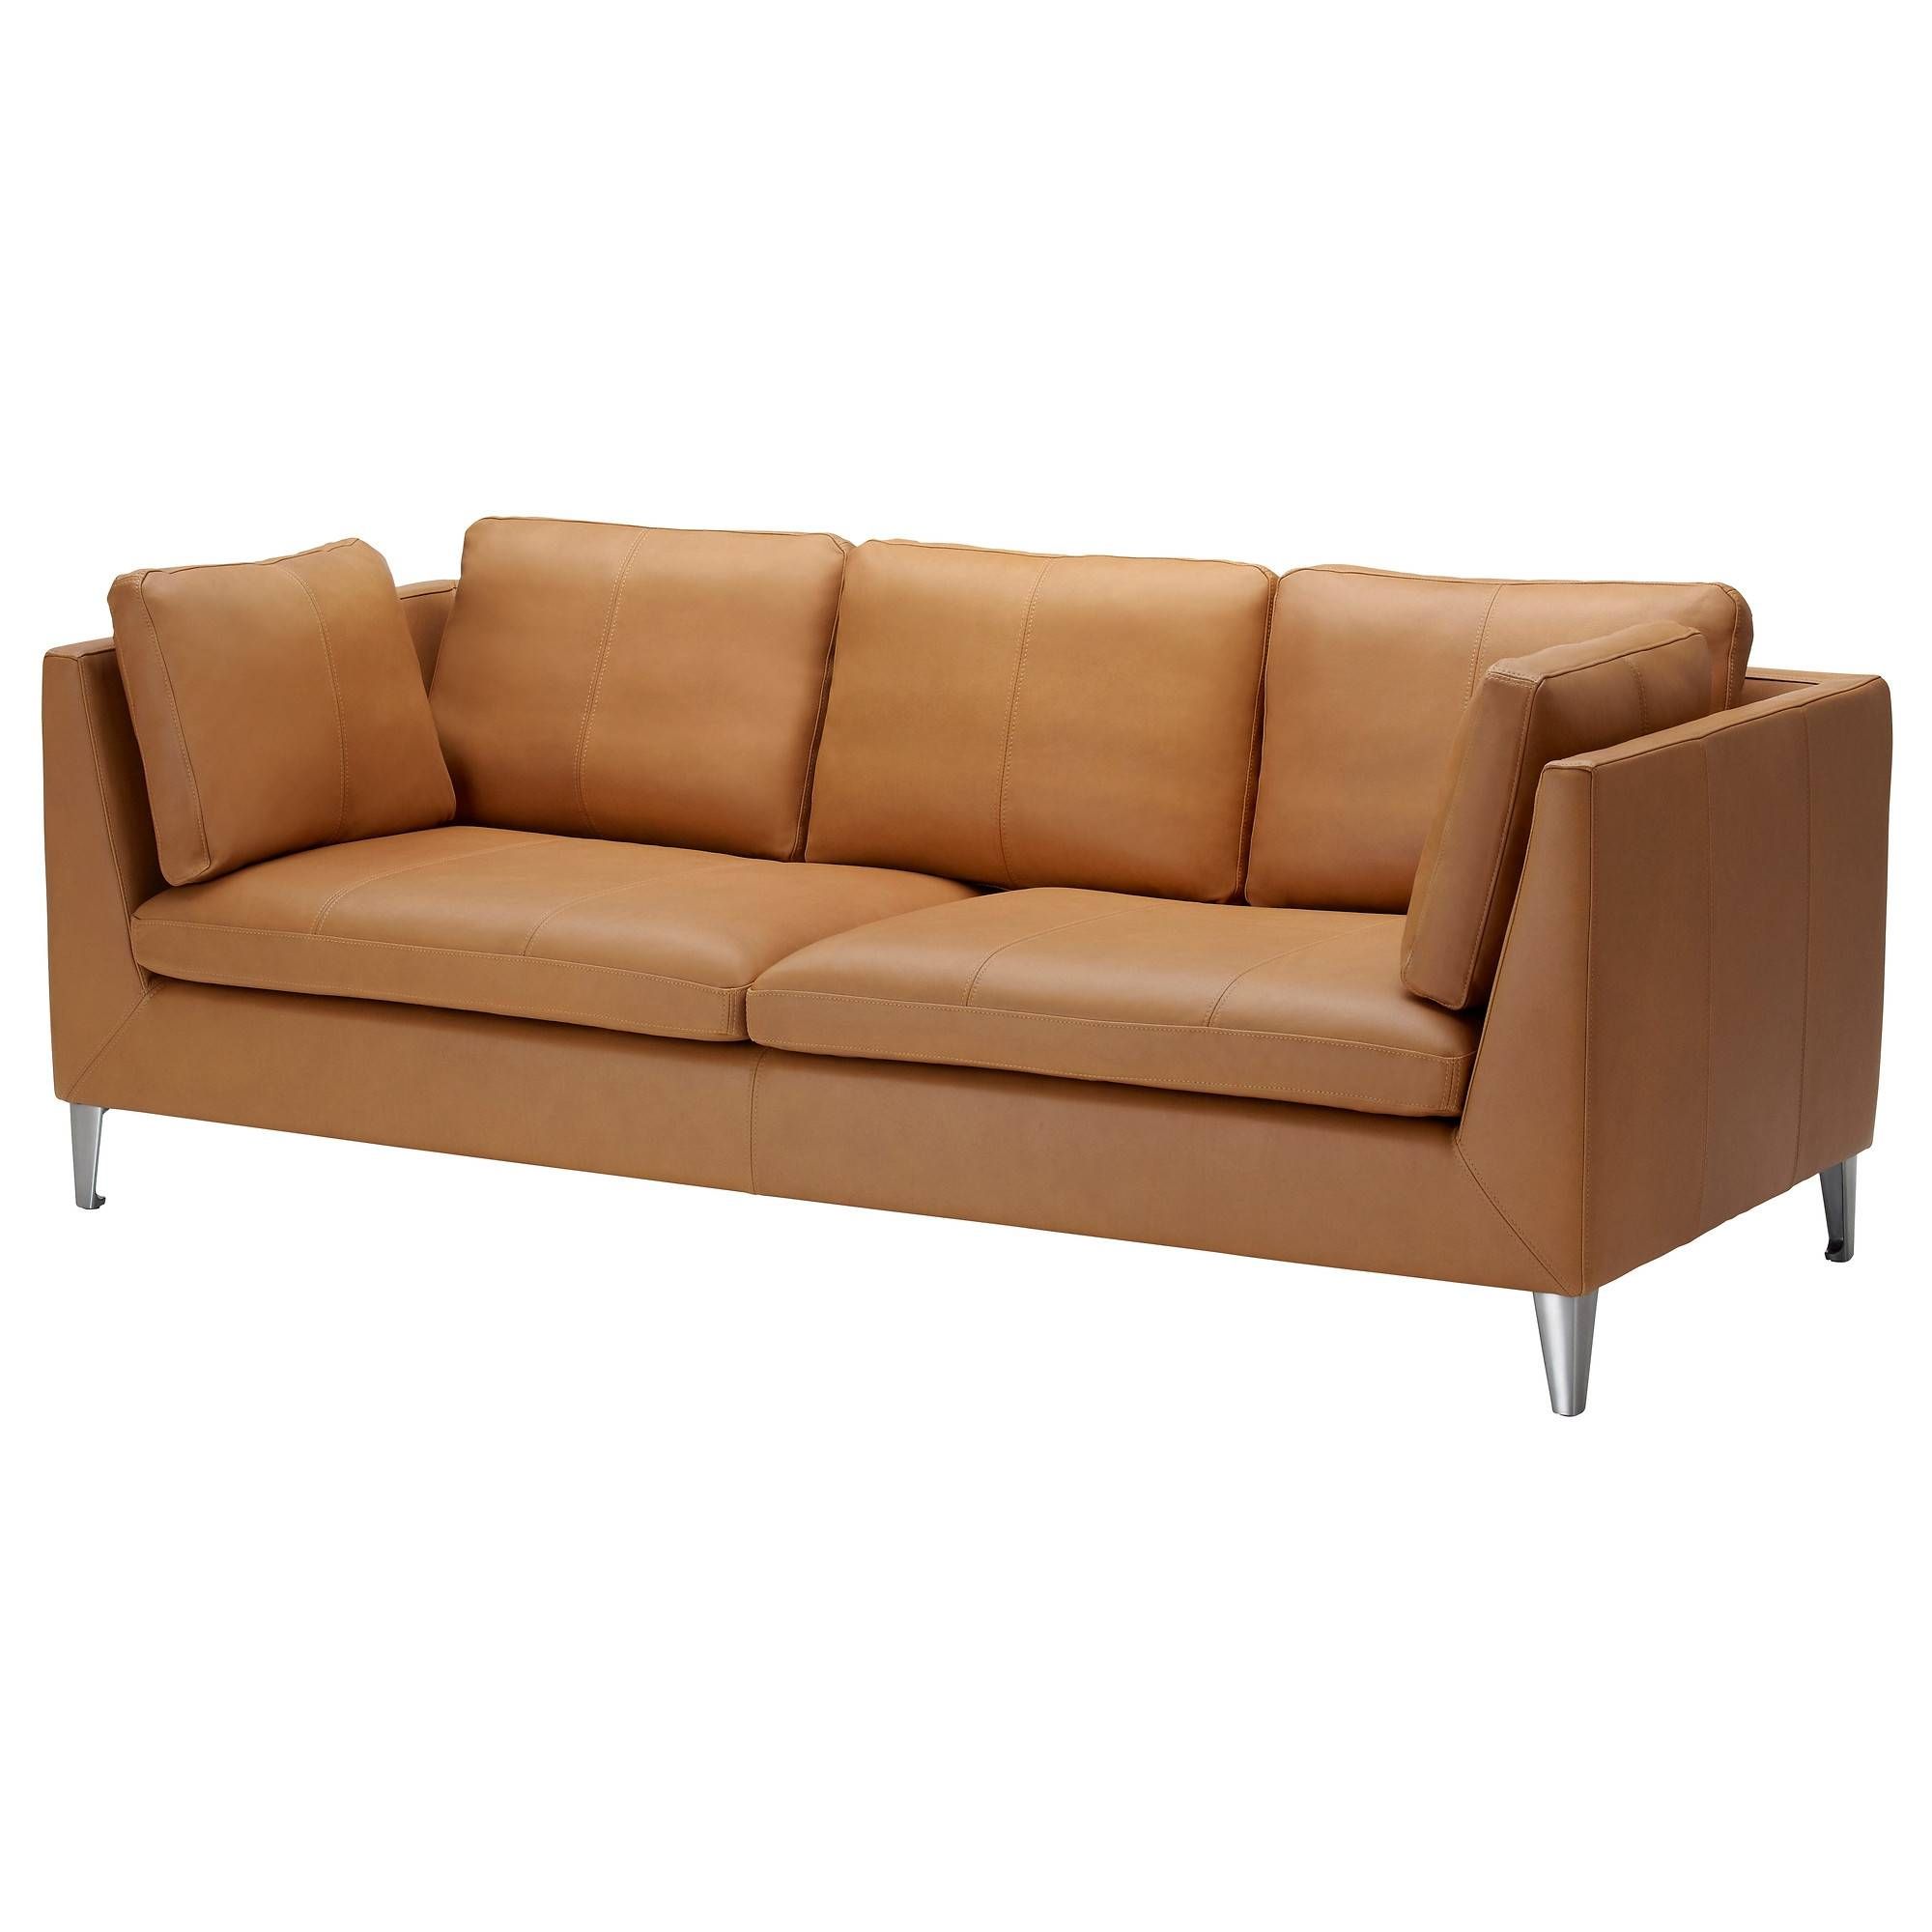 Leather & Faux Leather Couches, Chairs & Ottomans – Ikea With Sofa Chairs Ikea (View 9 of 30)